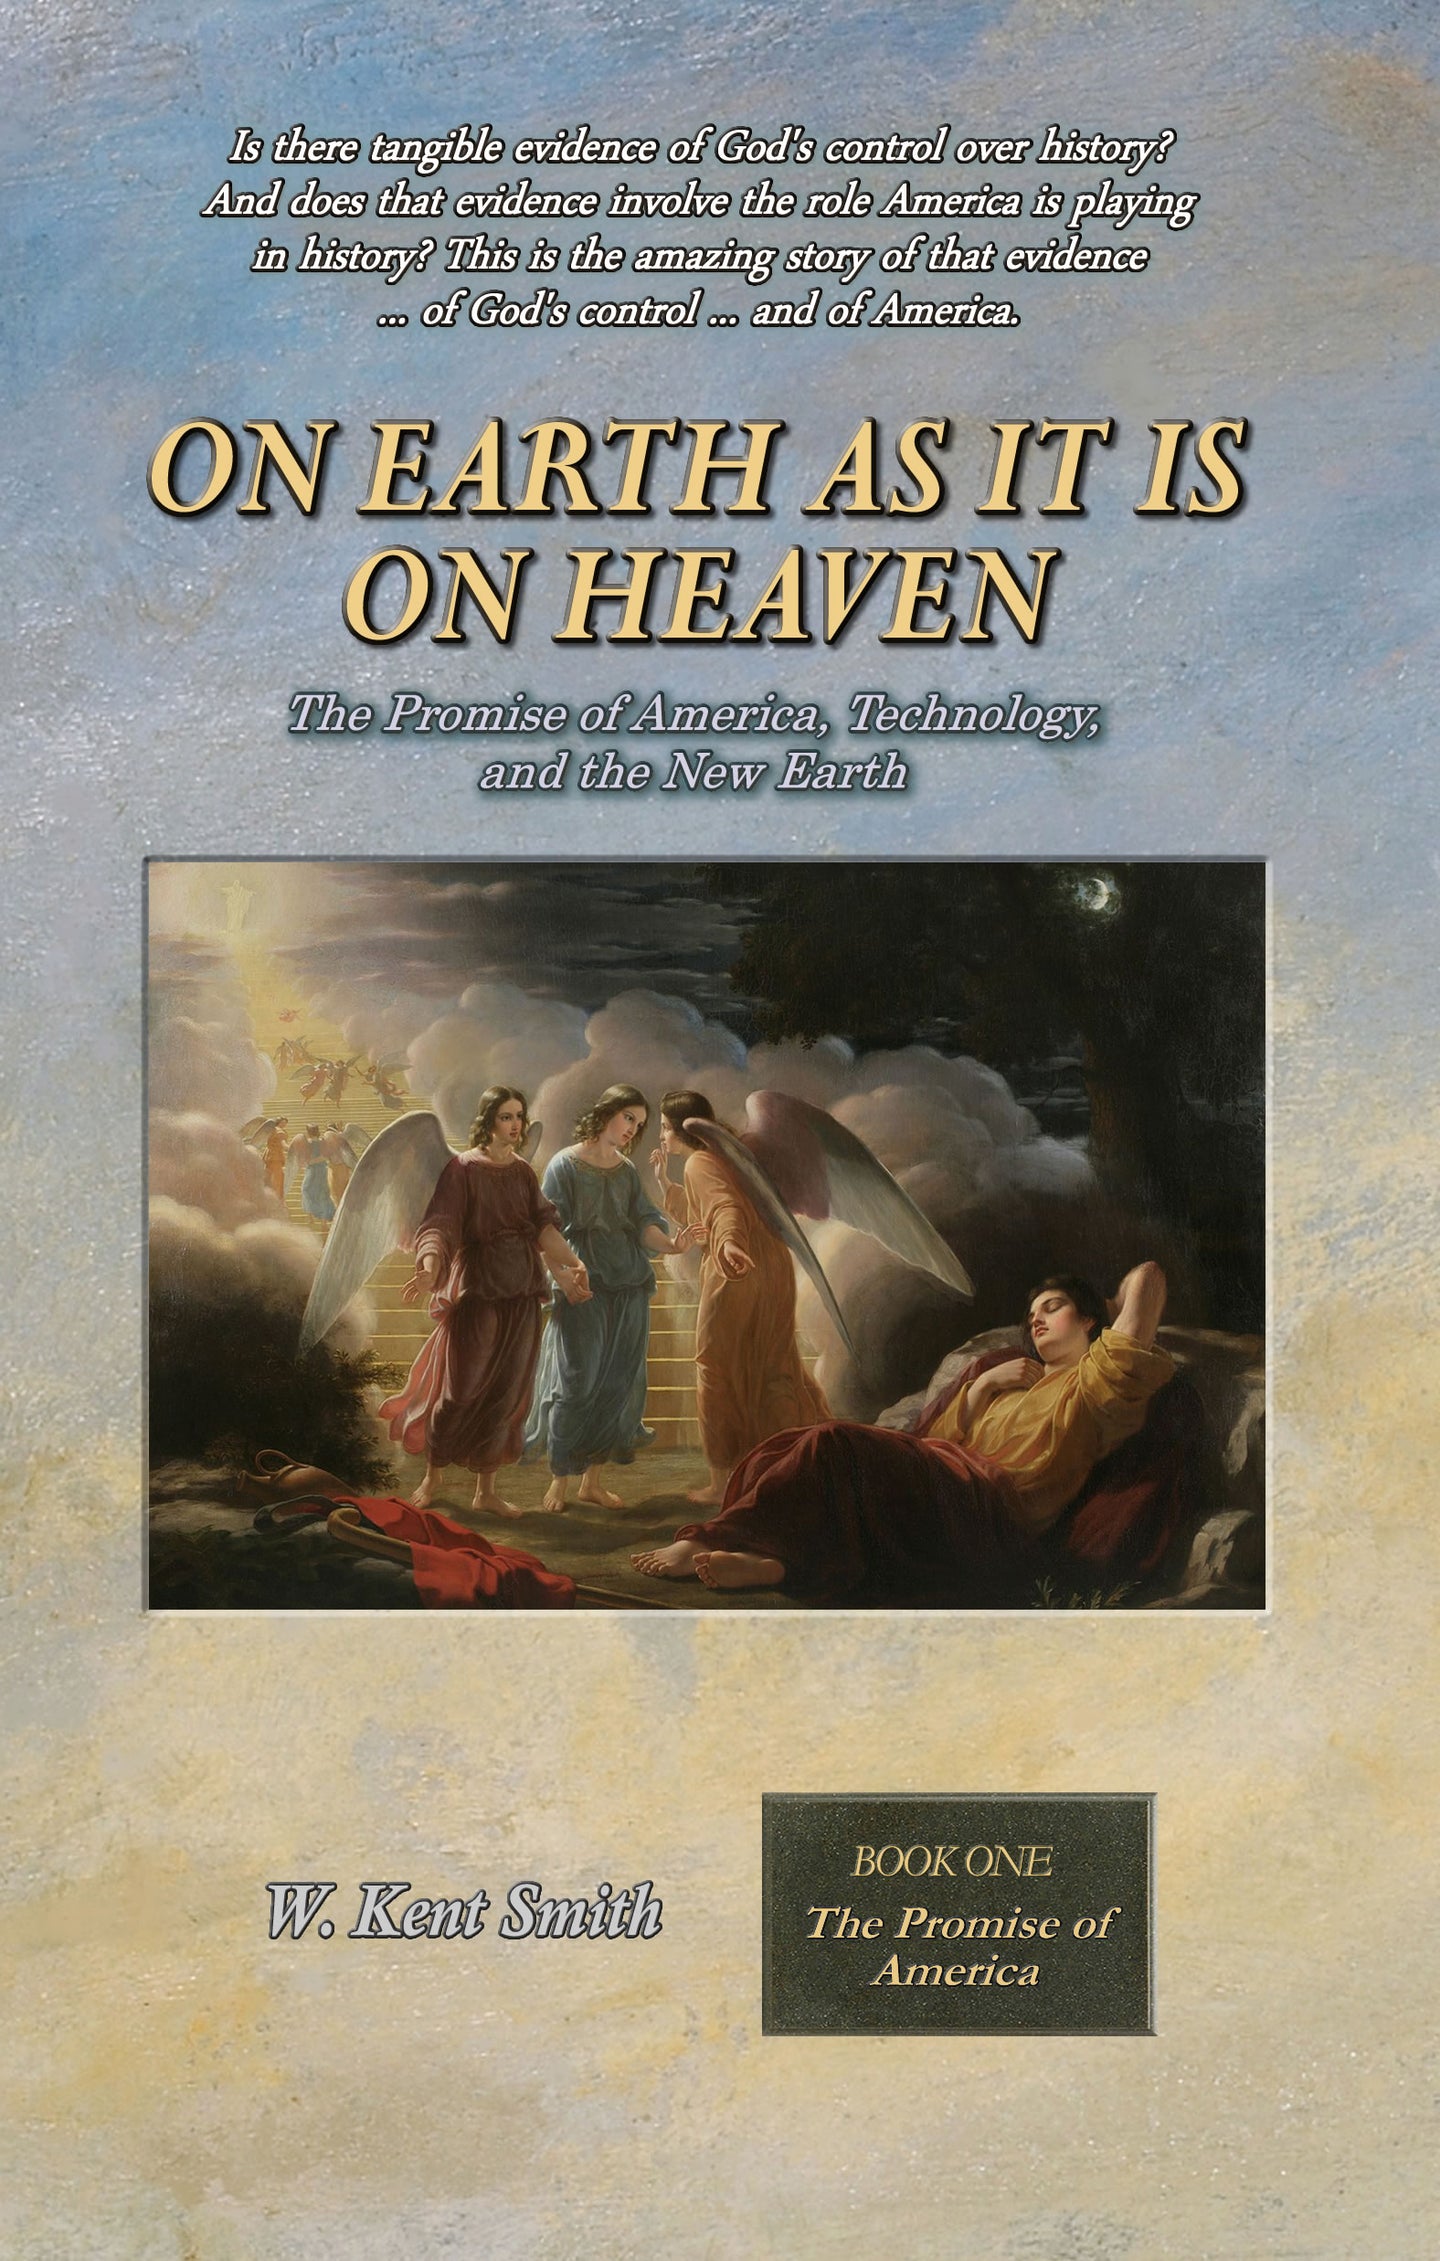 On Earth as It is On Heaven: The Promise of America, Technology, and the New Earth - Book One: The Promise of America Ebook